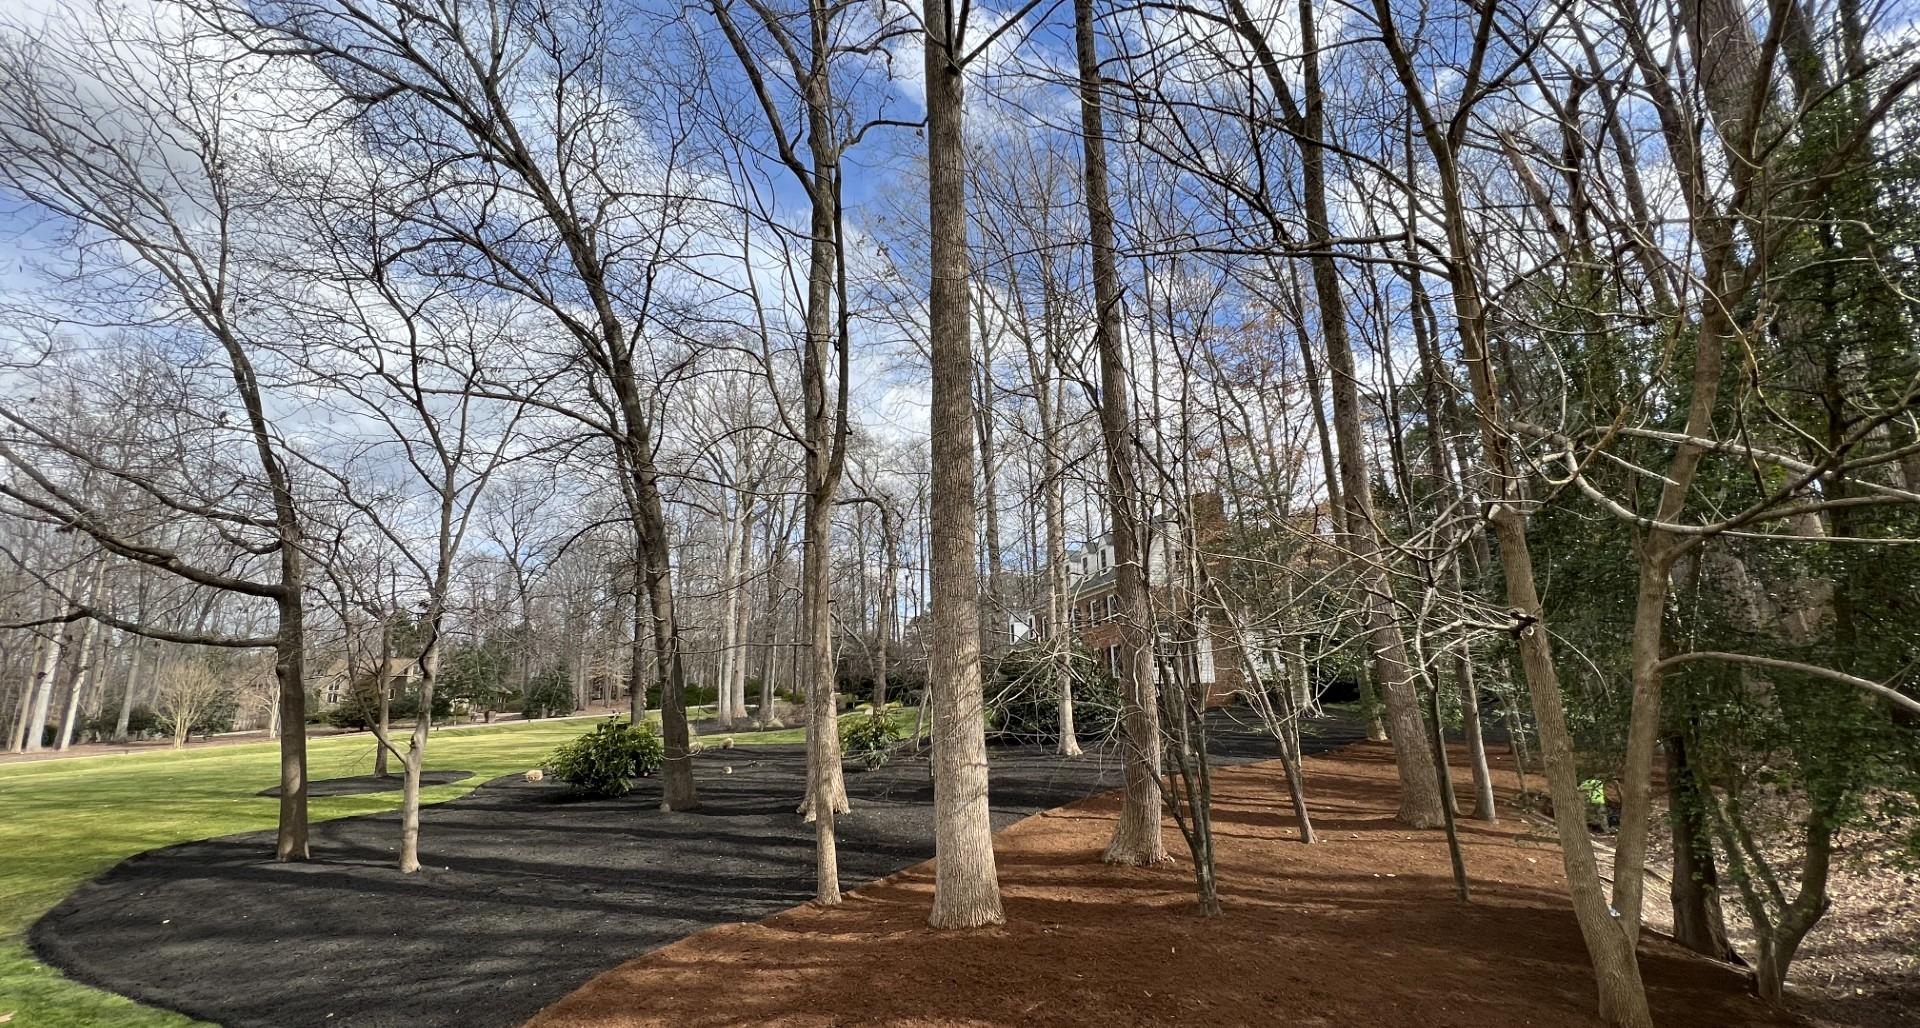 Choosing the right type of mulch for your property in North Carolina